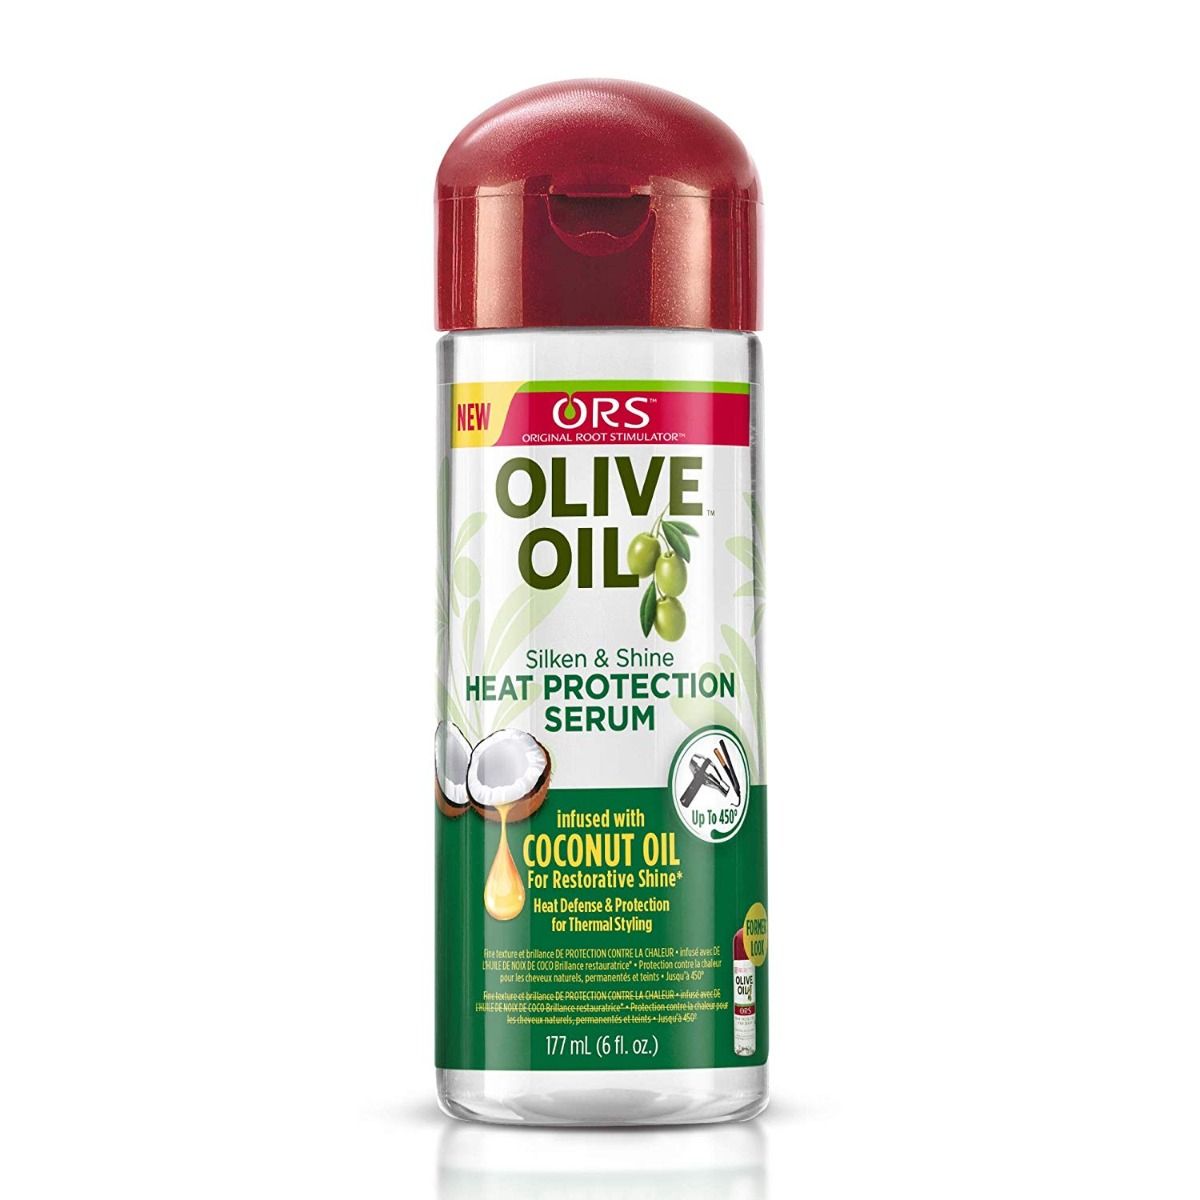 ORS Olive Oil Heat Protection Serum 